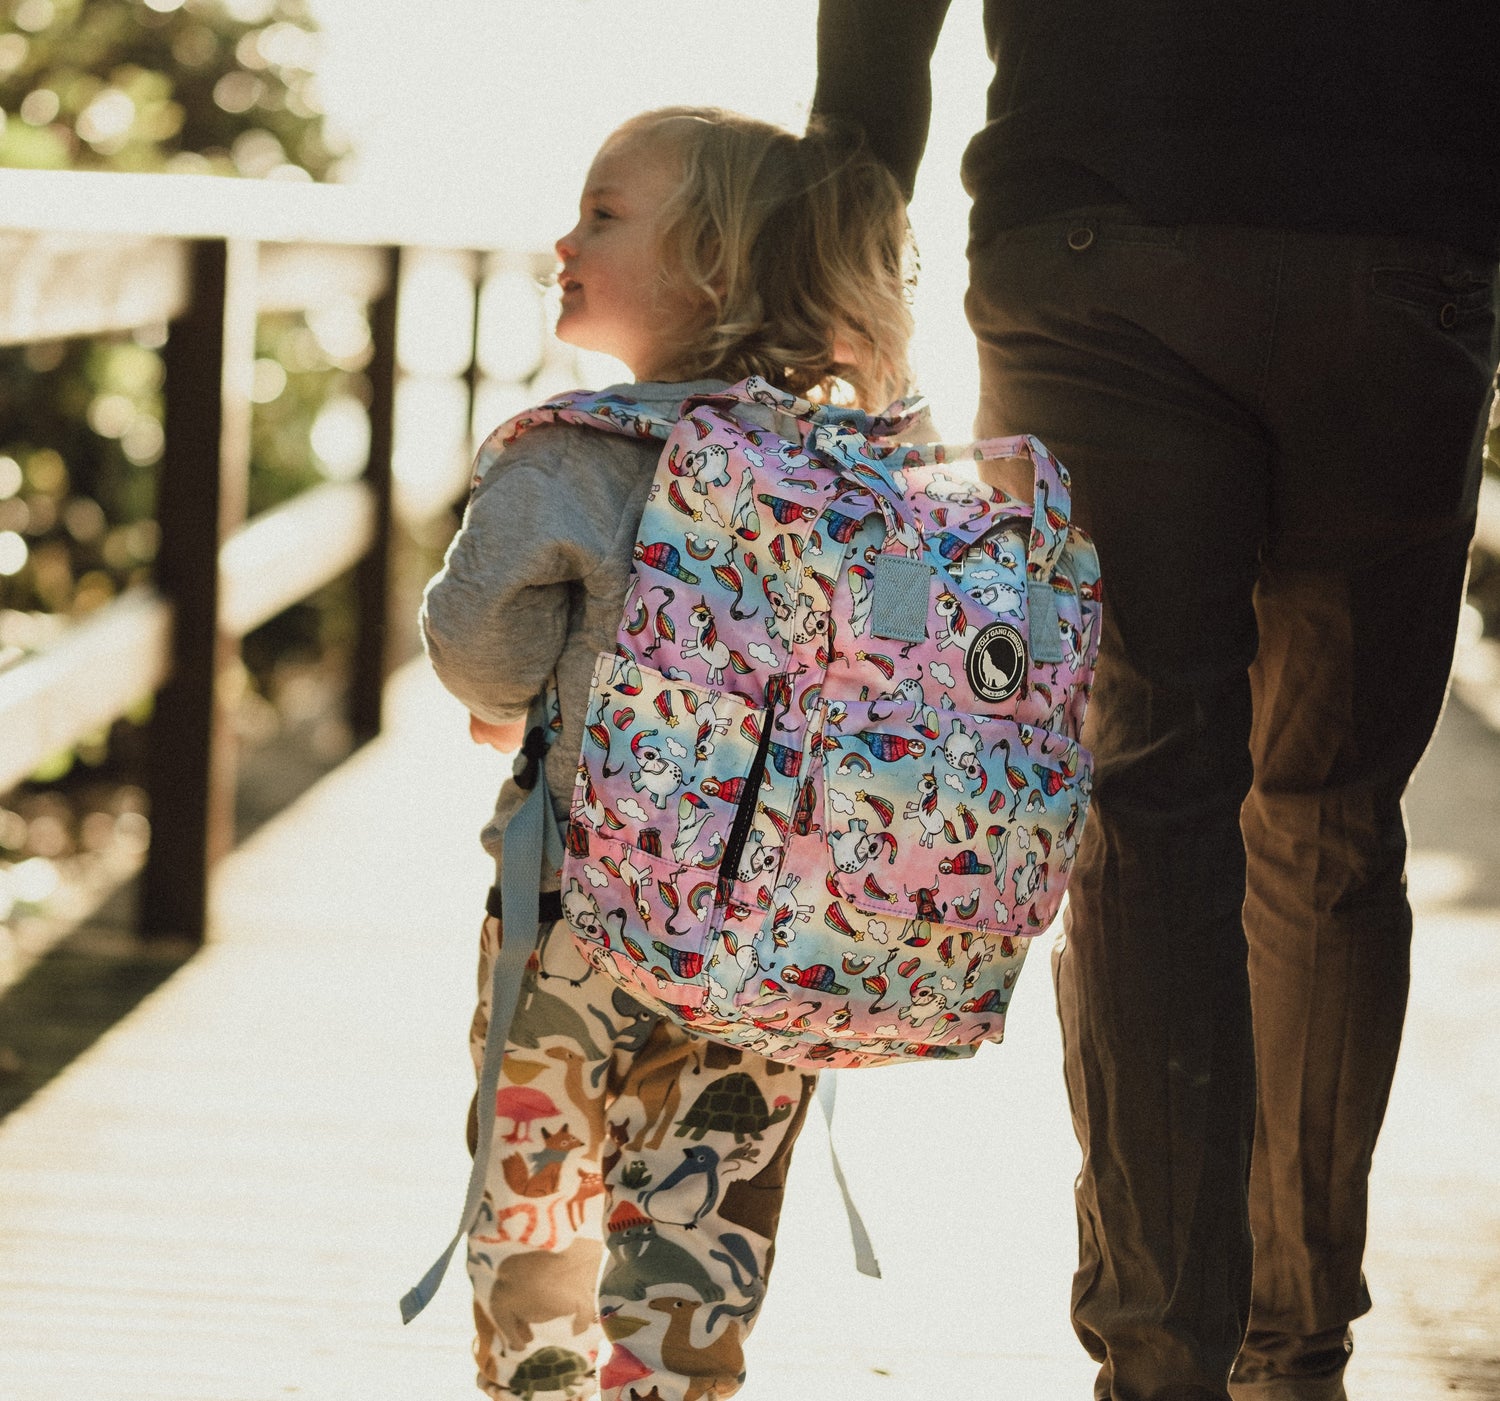 WOLFPACK KIDS' BACKPACK - BORN TO SPARKLE by WOLF GANG DESIGNS - The Playful Collective